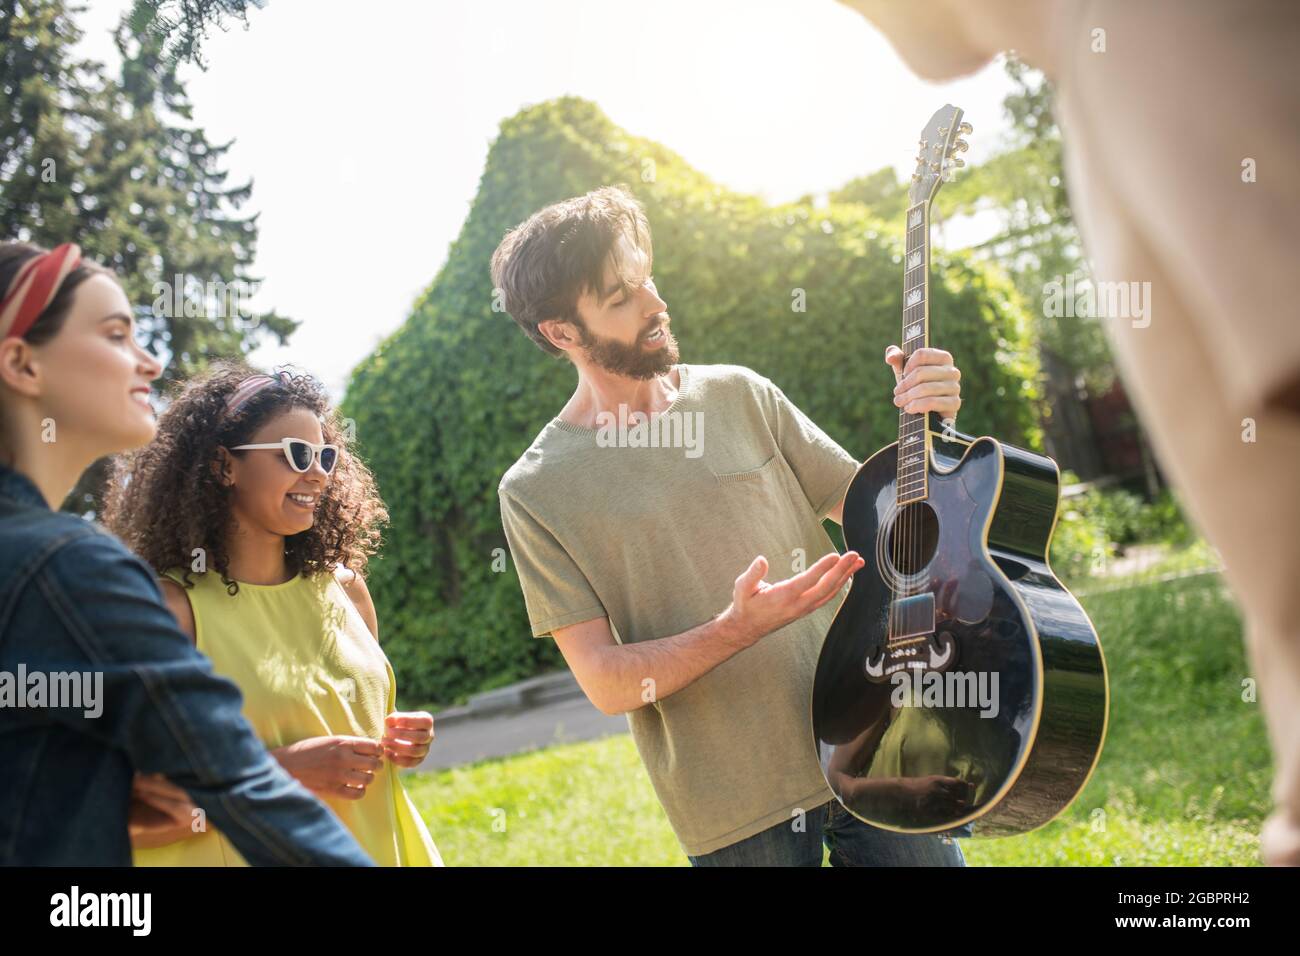 Guy showing guitar and looking friends Stock Photo